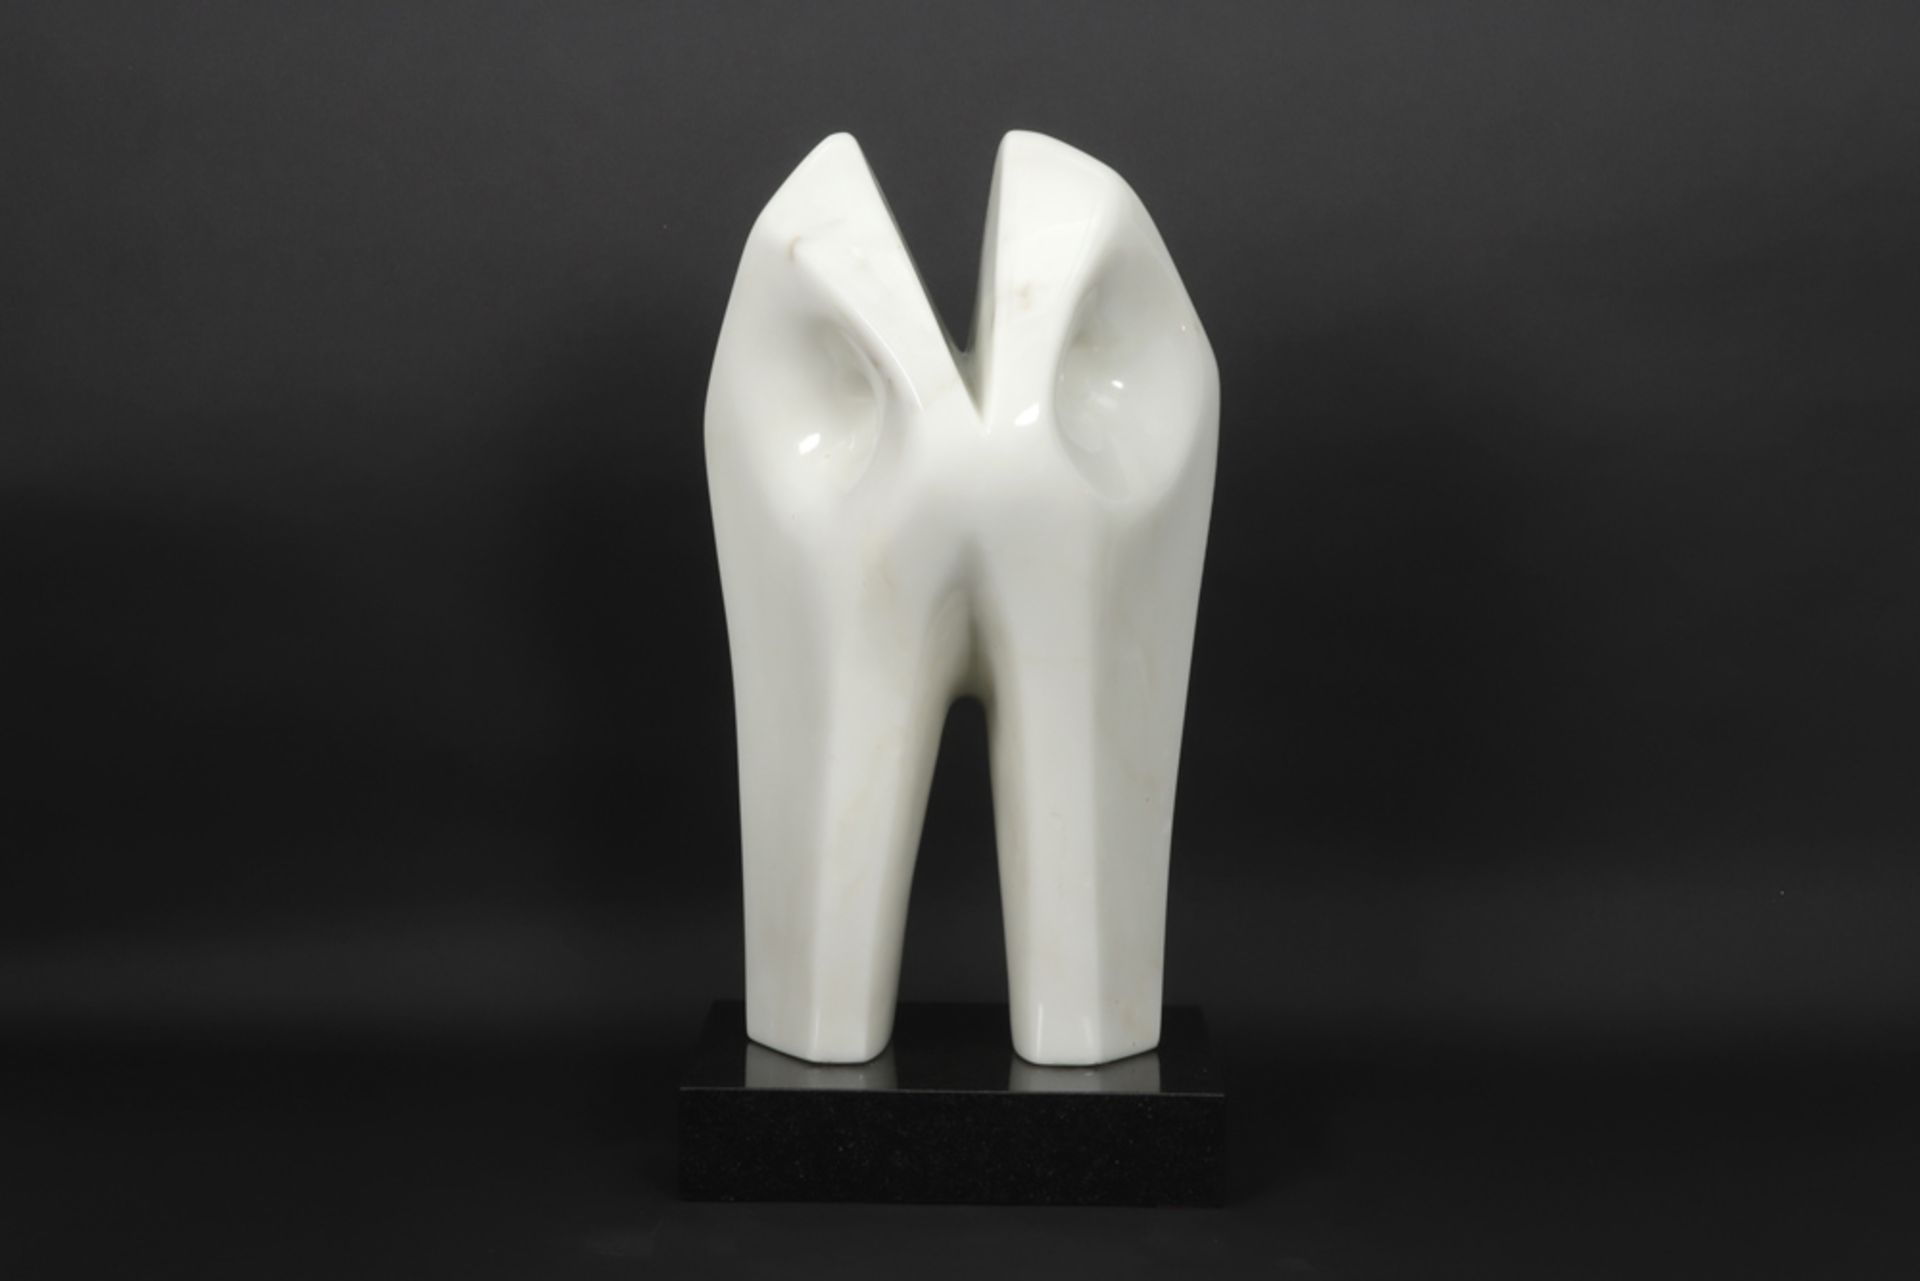 20th Cent. Belgian abstract sculpture in white and black marble - attributed to/in the style of